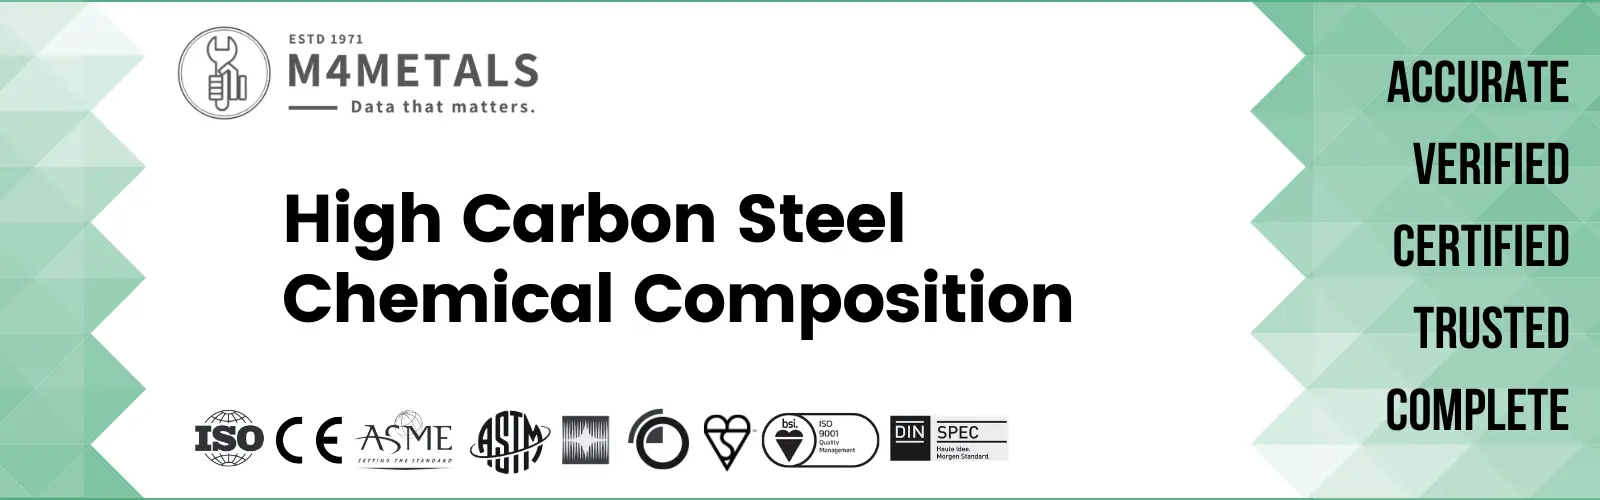 High Carbon Steel Chemical Composition